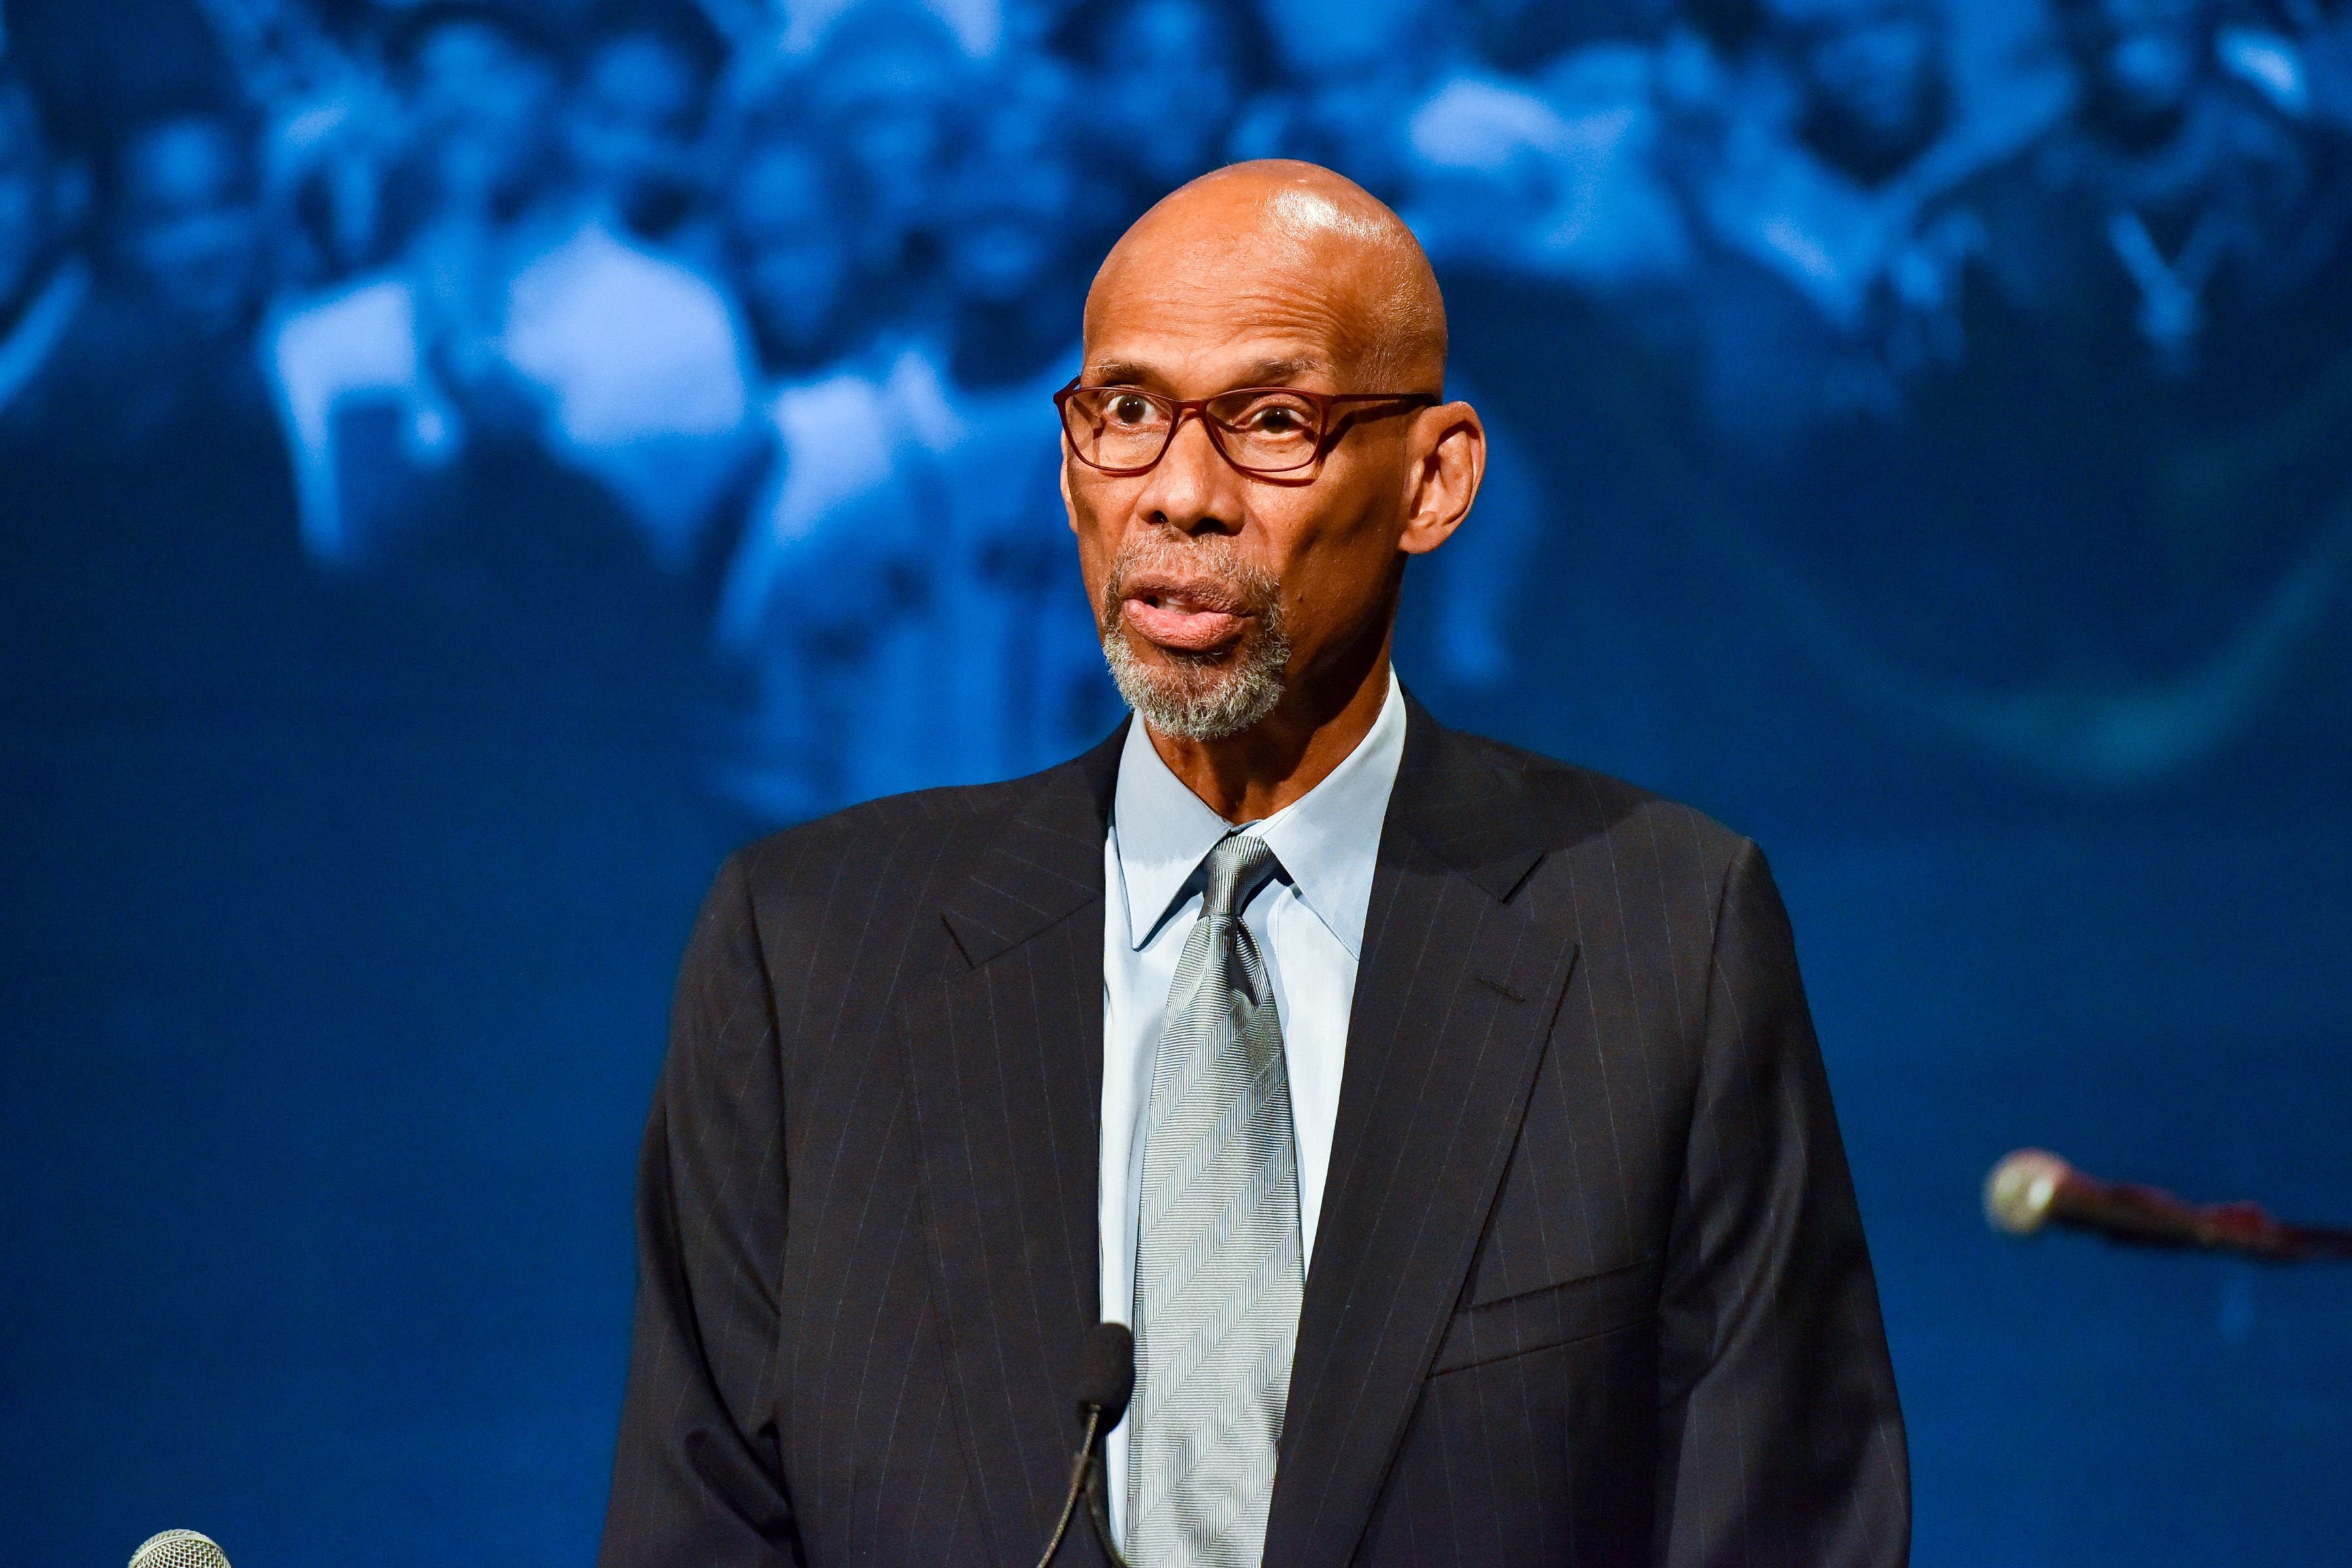  Kareem Abdul-Jabbar speaking at the The Gordon Parks Foundation 2019 Annual Awards in New York City | Source: Getty Images